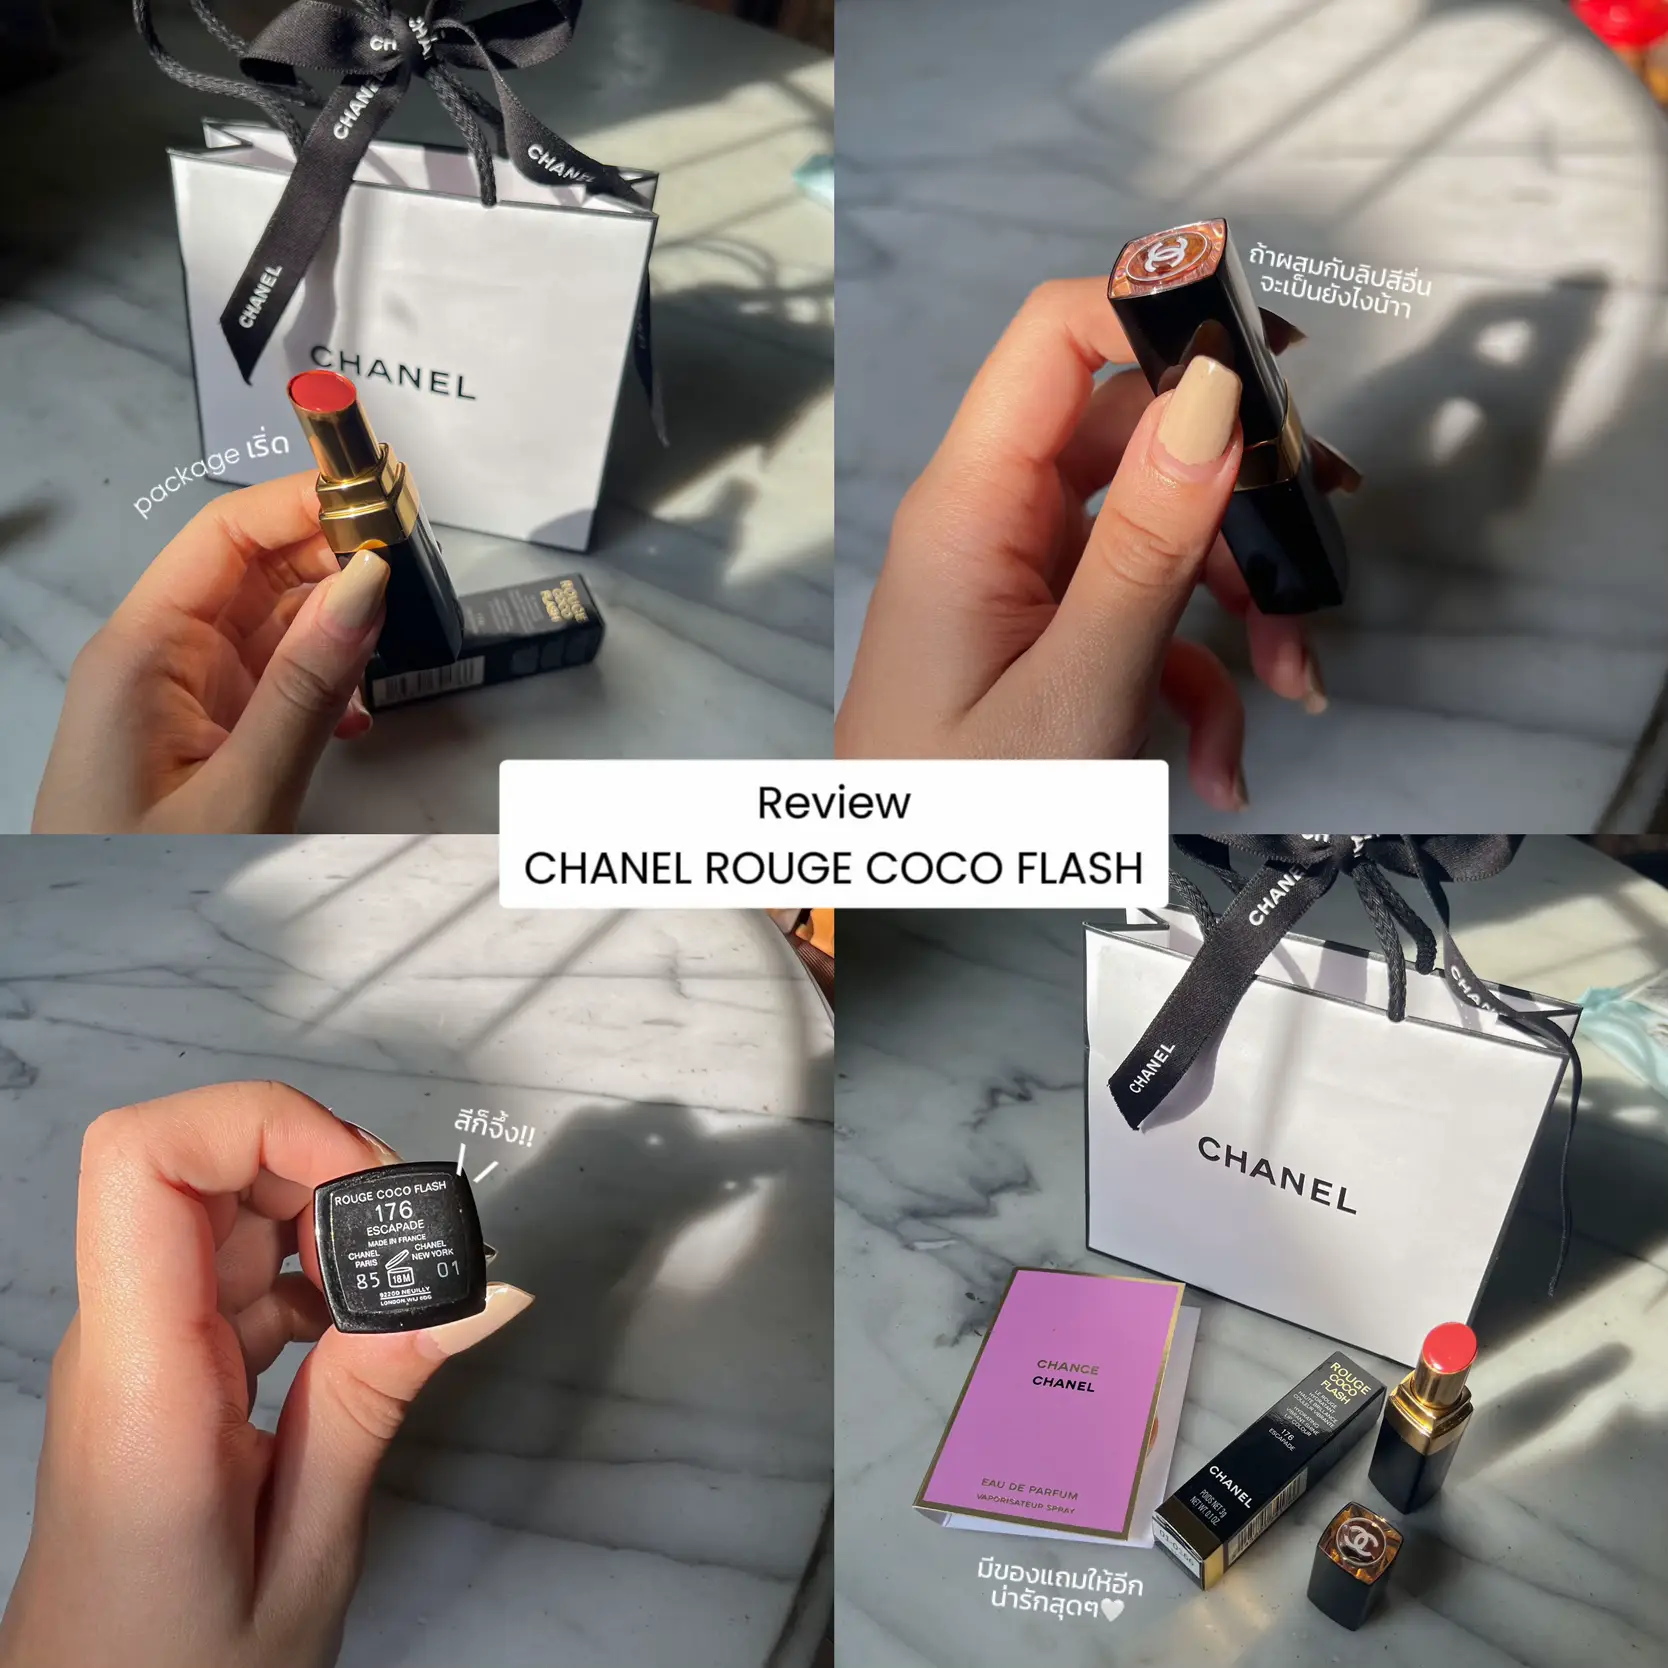 CHANEL Rouge Coco Flash Lipsticks, Swatches & Review